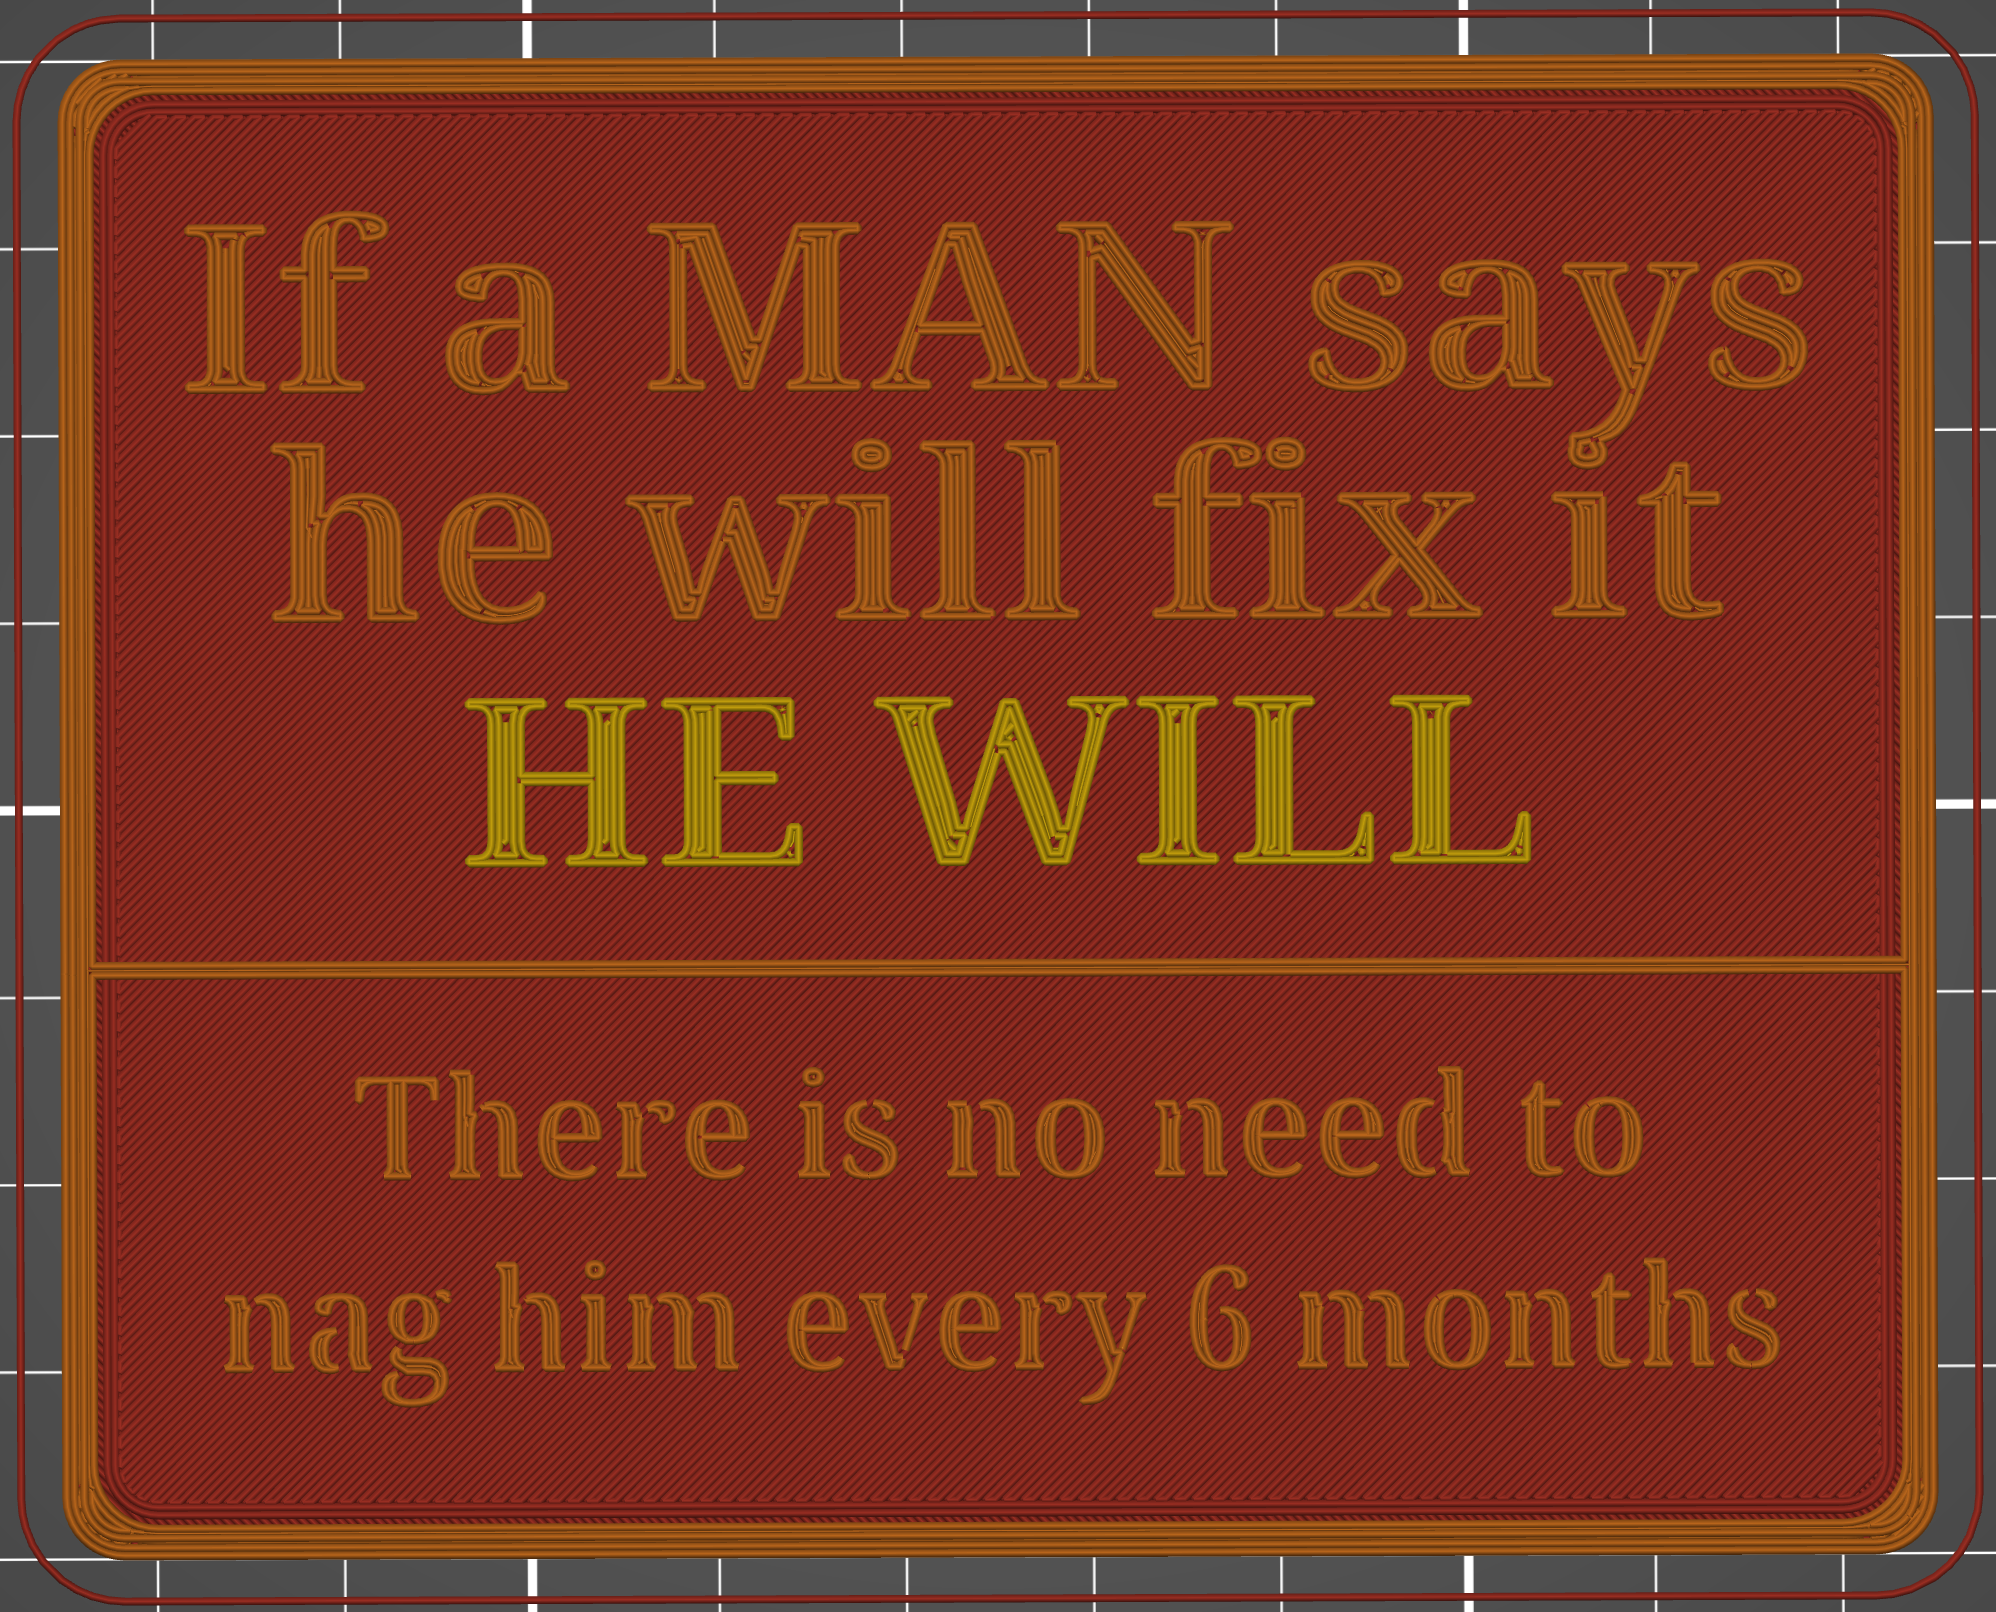 He will fix it (with color change)